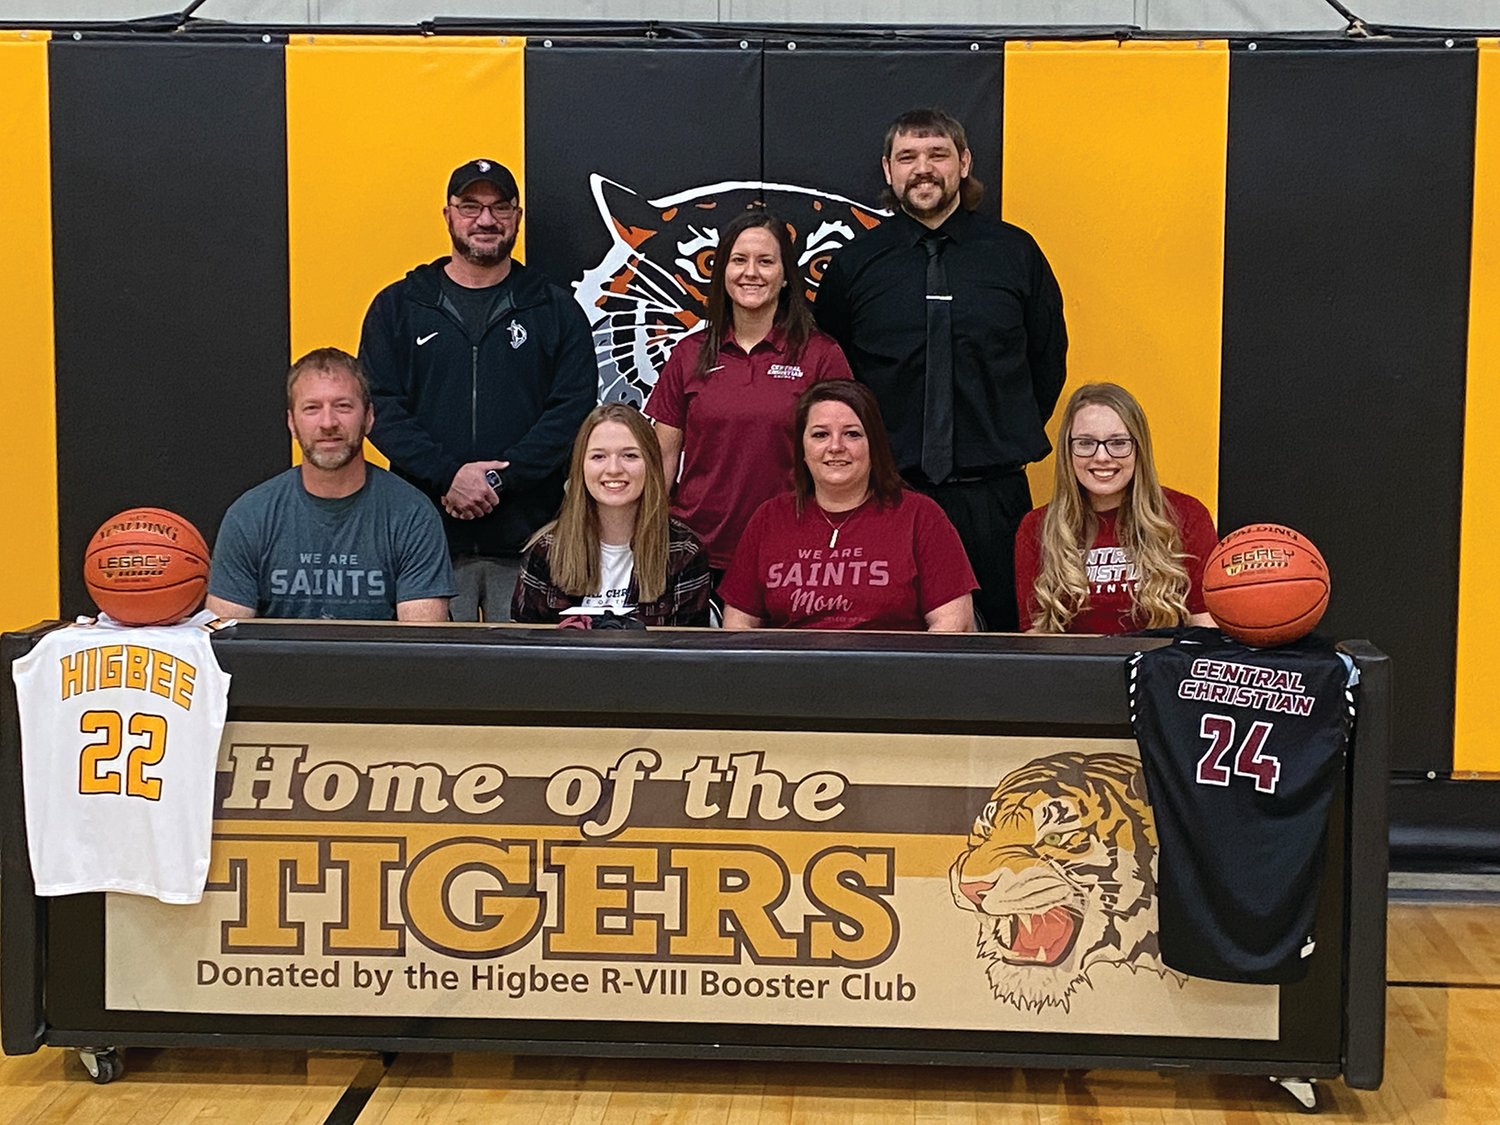 Higbee senior Macey Whisenand, front row second from left, signed a letter of intent to play basketball at Central Christian College of the Bible in Moberly on Feb. 11. Also pictured seated with Whisenand are her parents, Jonathan and Brandy Whisenand and her sister, Alexis. Back row, from left, CCCB assistant coach Allen Maltsberger, CCCB head coach Kori Zarzutzki and Higbee head coach Tanner Burton.